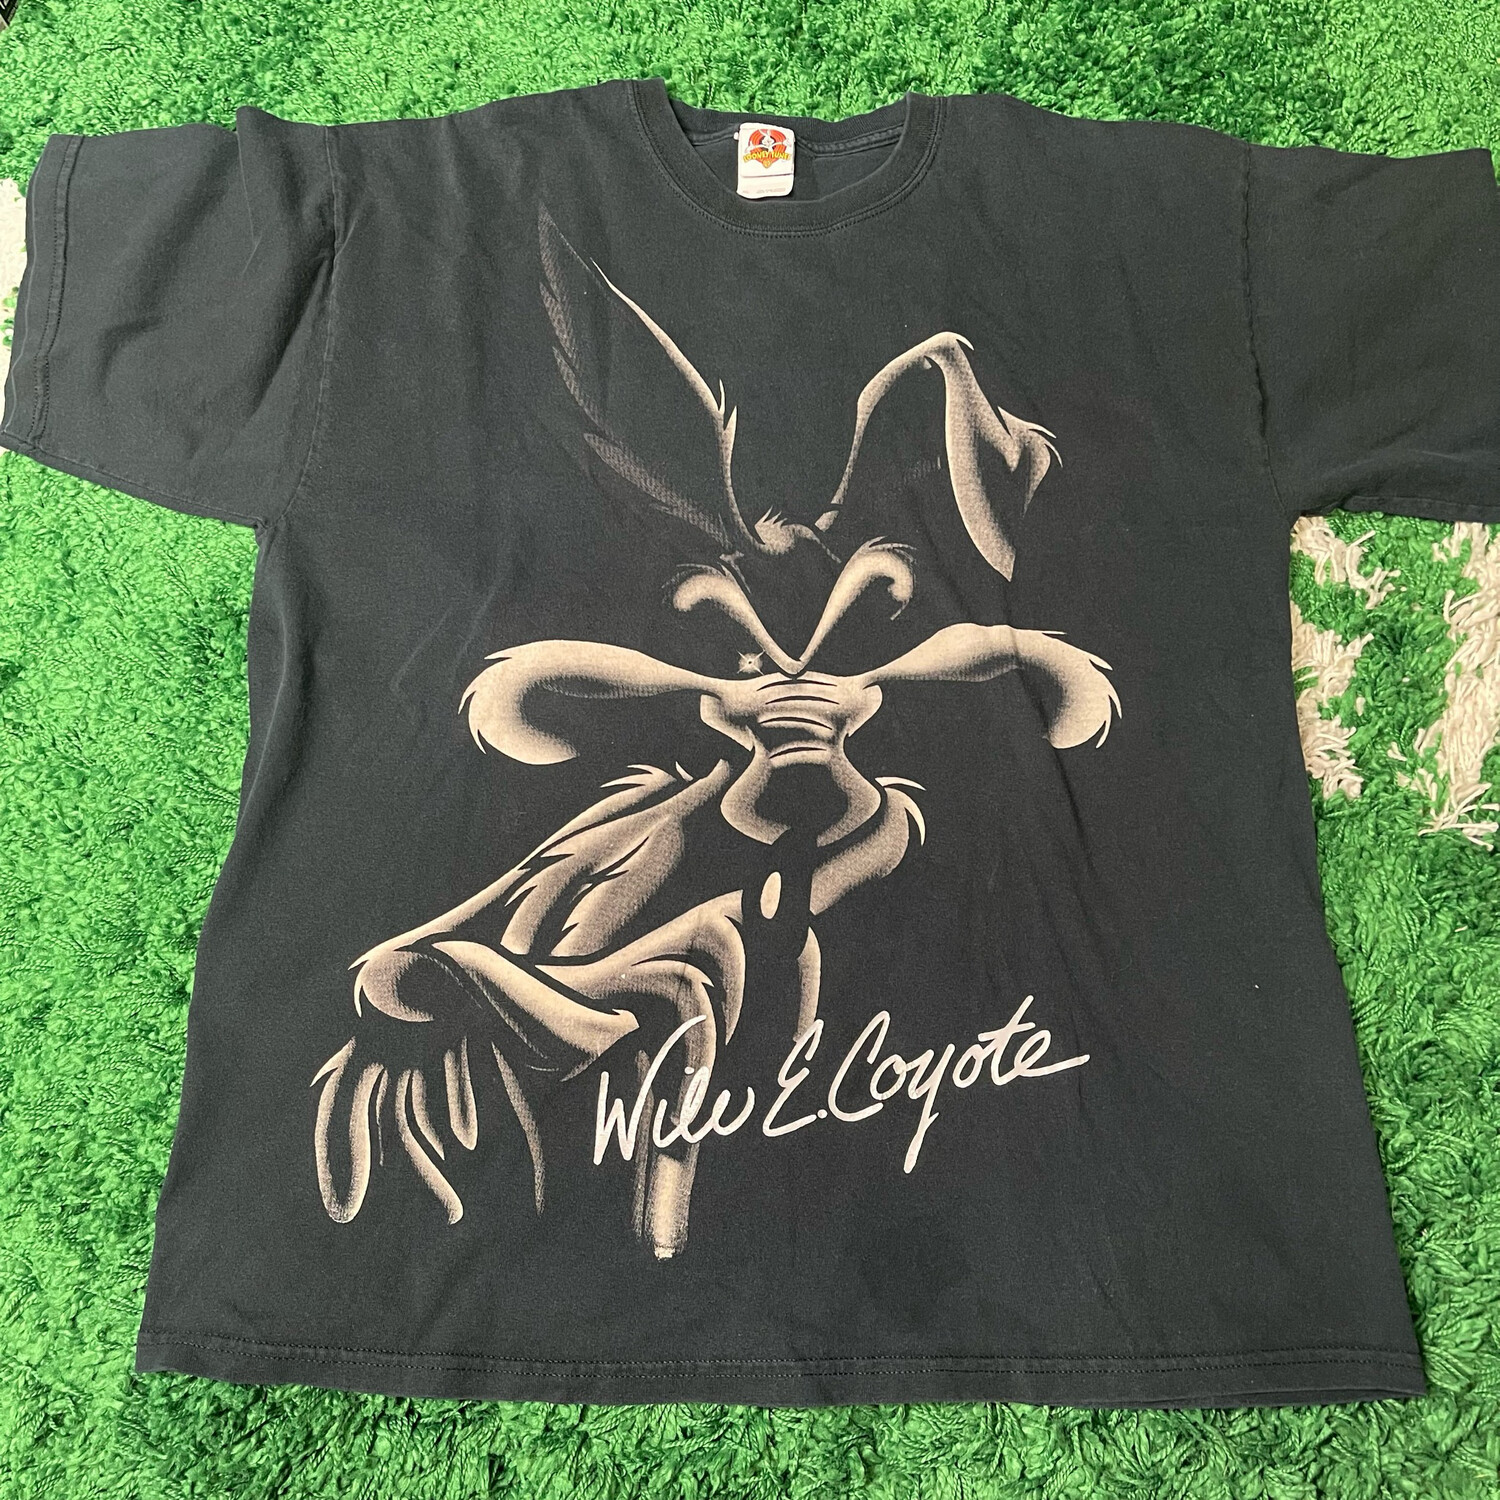 Wile E. Coyote Tee Size XL